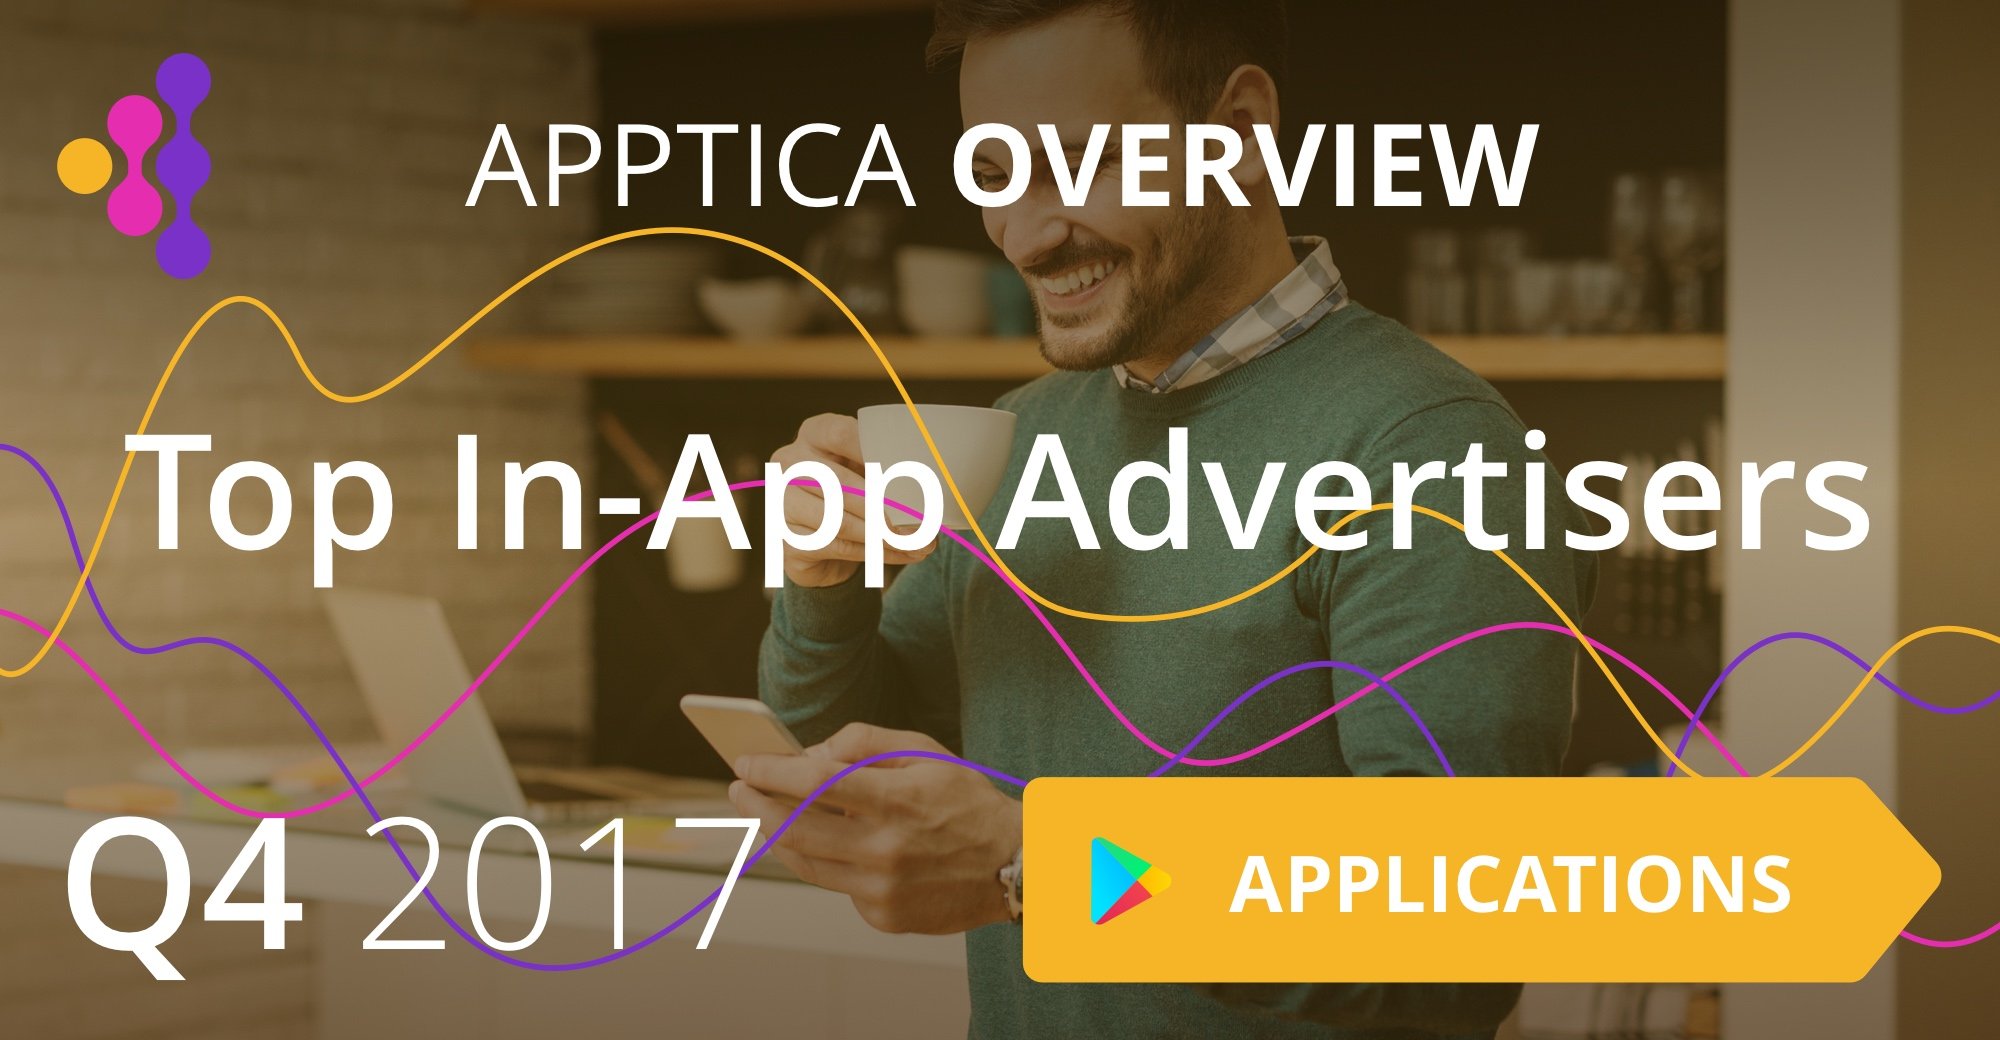 Top In-App Advertisers of Q4 2017, Android, Application Category. Apptica Overview.